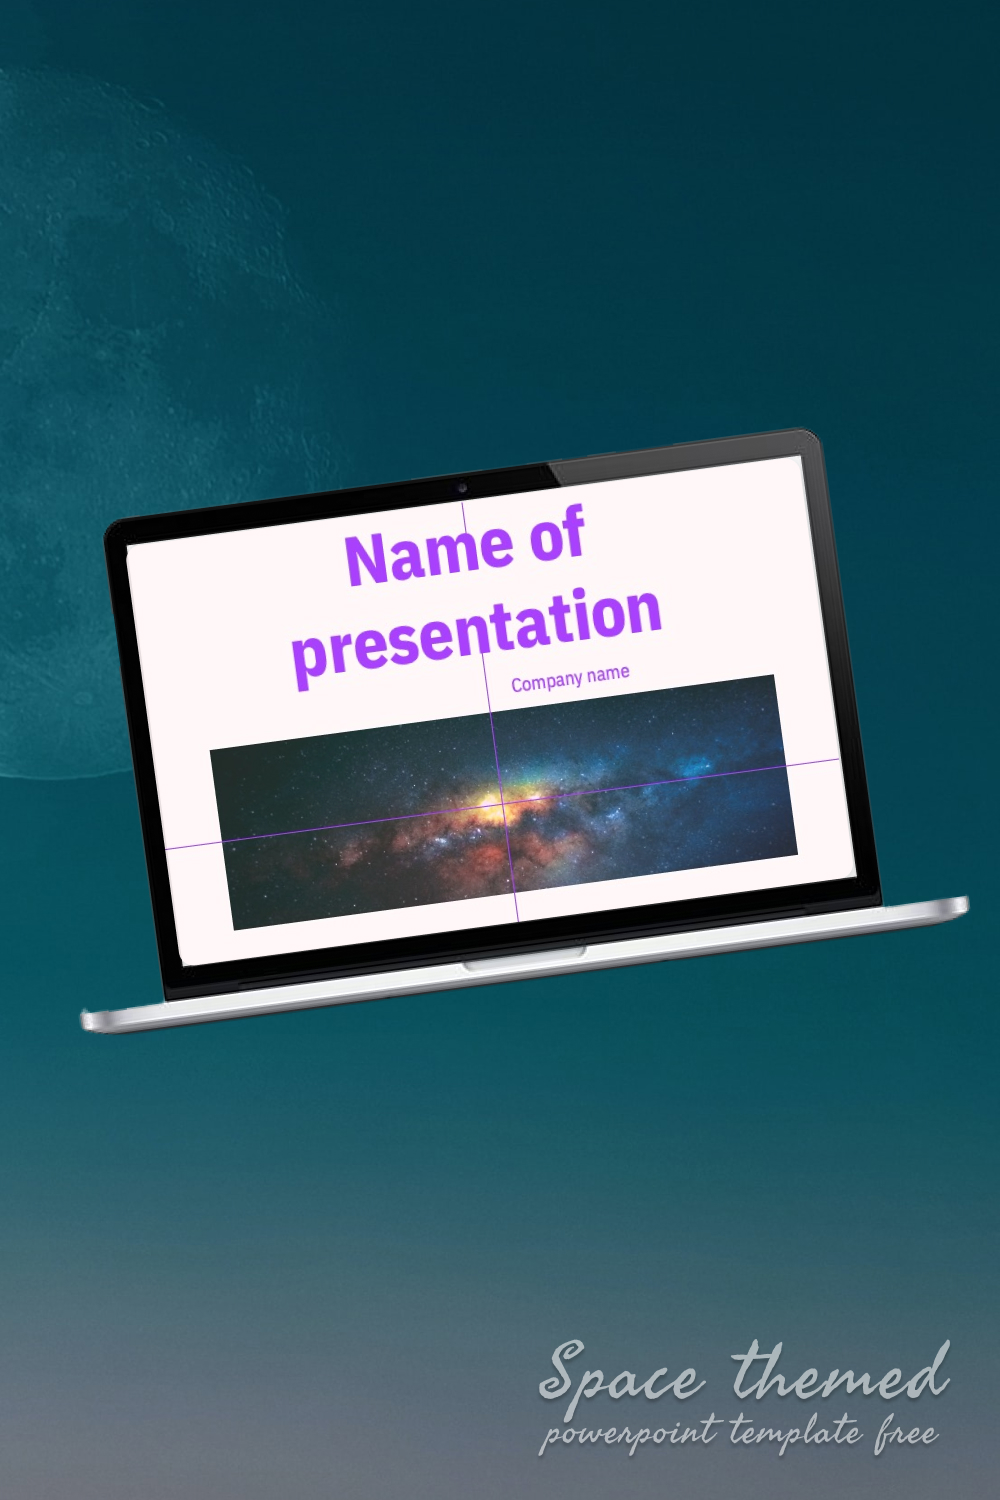 Space themed powerpoint template of pinterest.